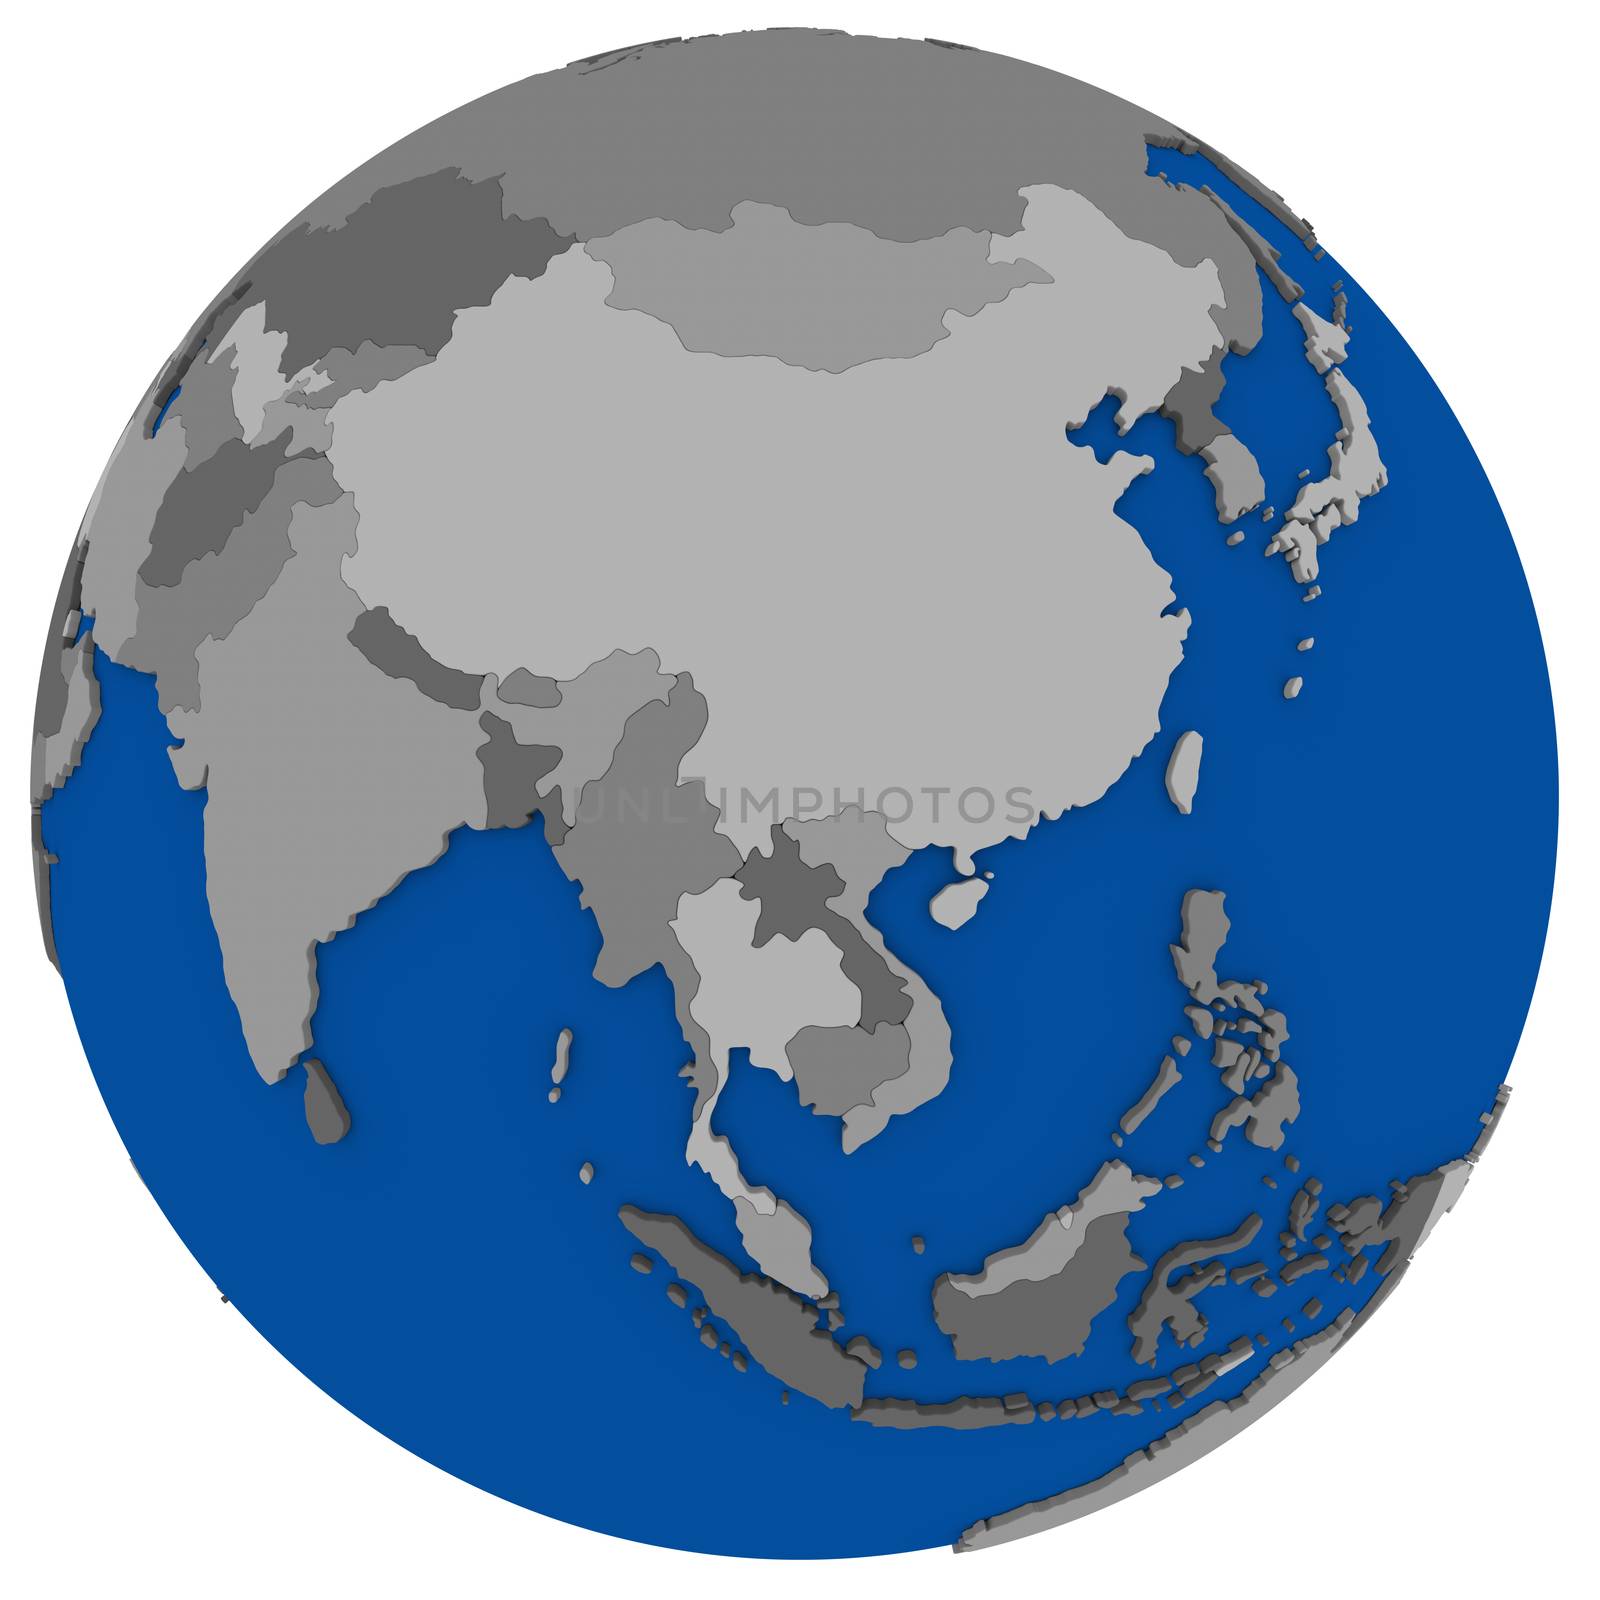 southeast Asia on Earth political map by Harvepino